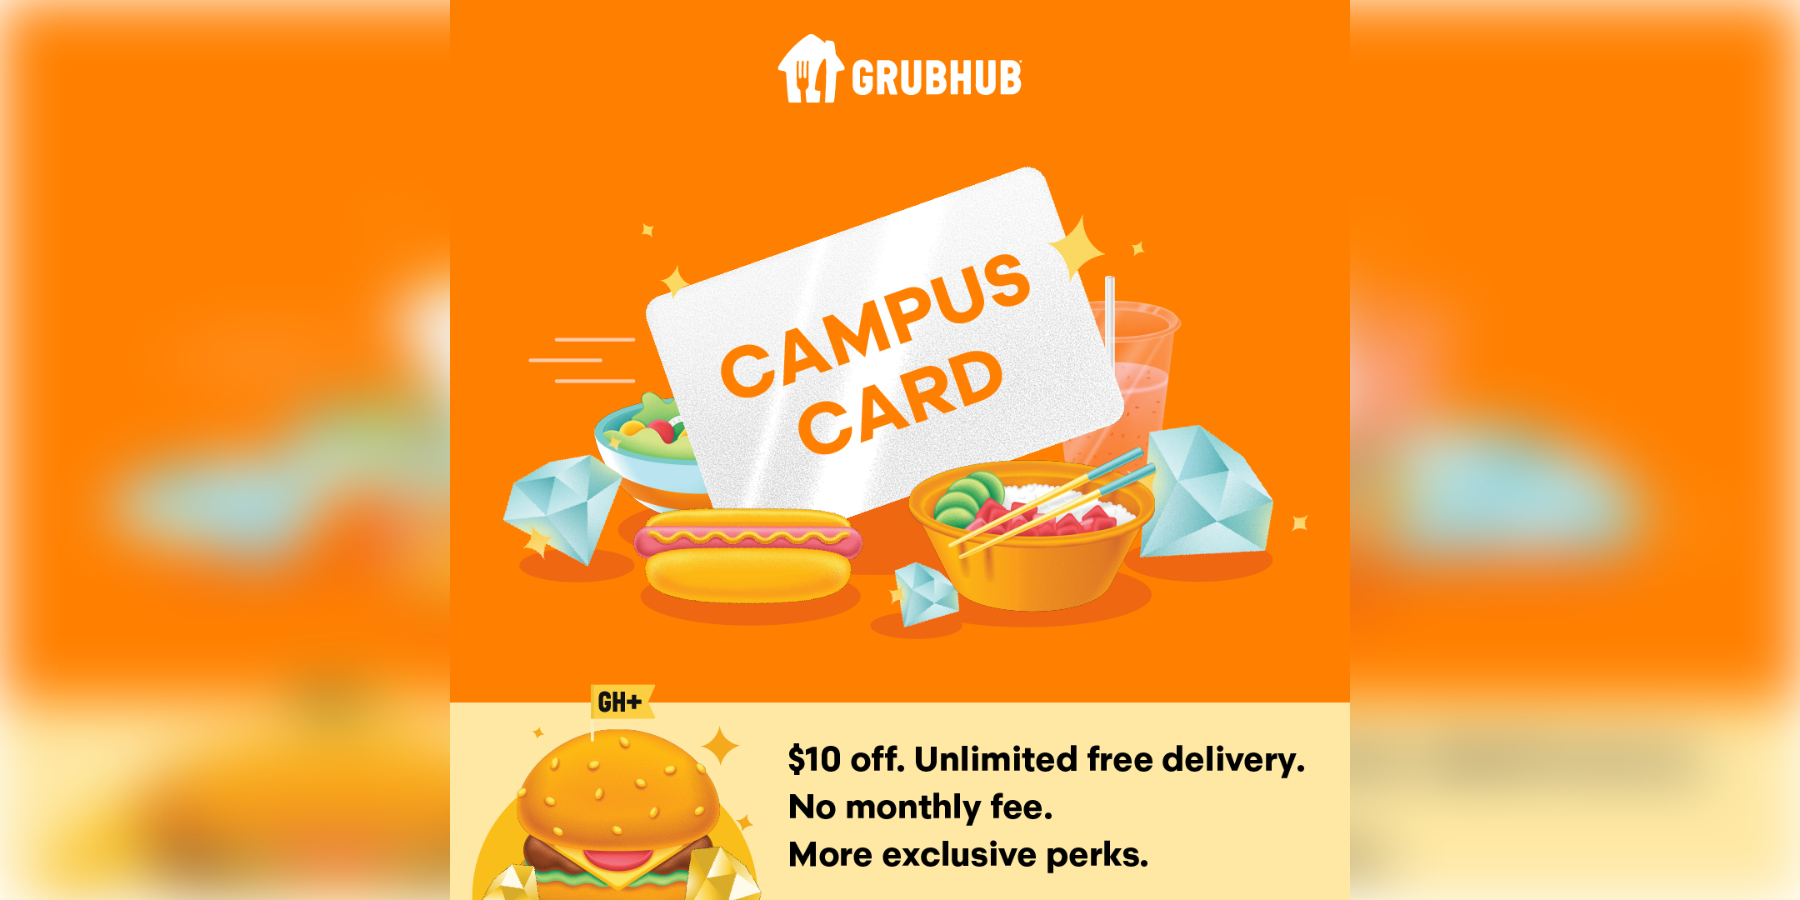 Mercer partners with Grubhub to offer free delivery and more food options - Mercer University